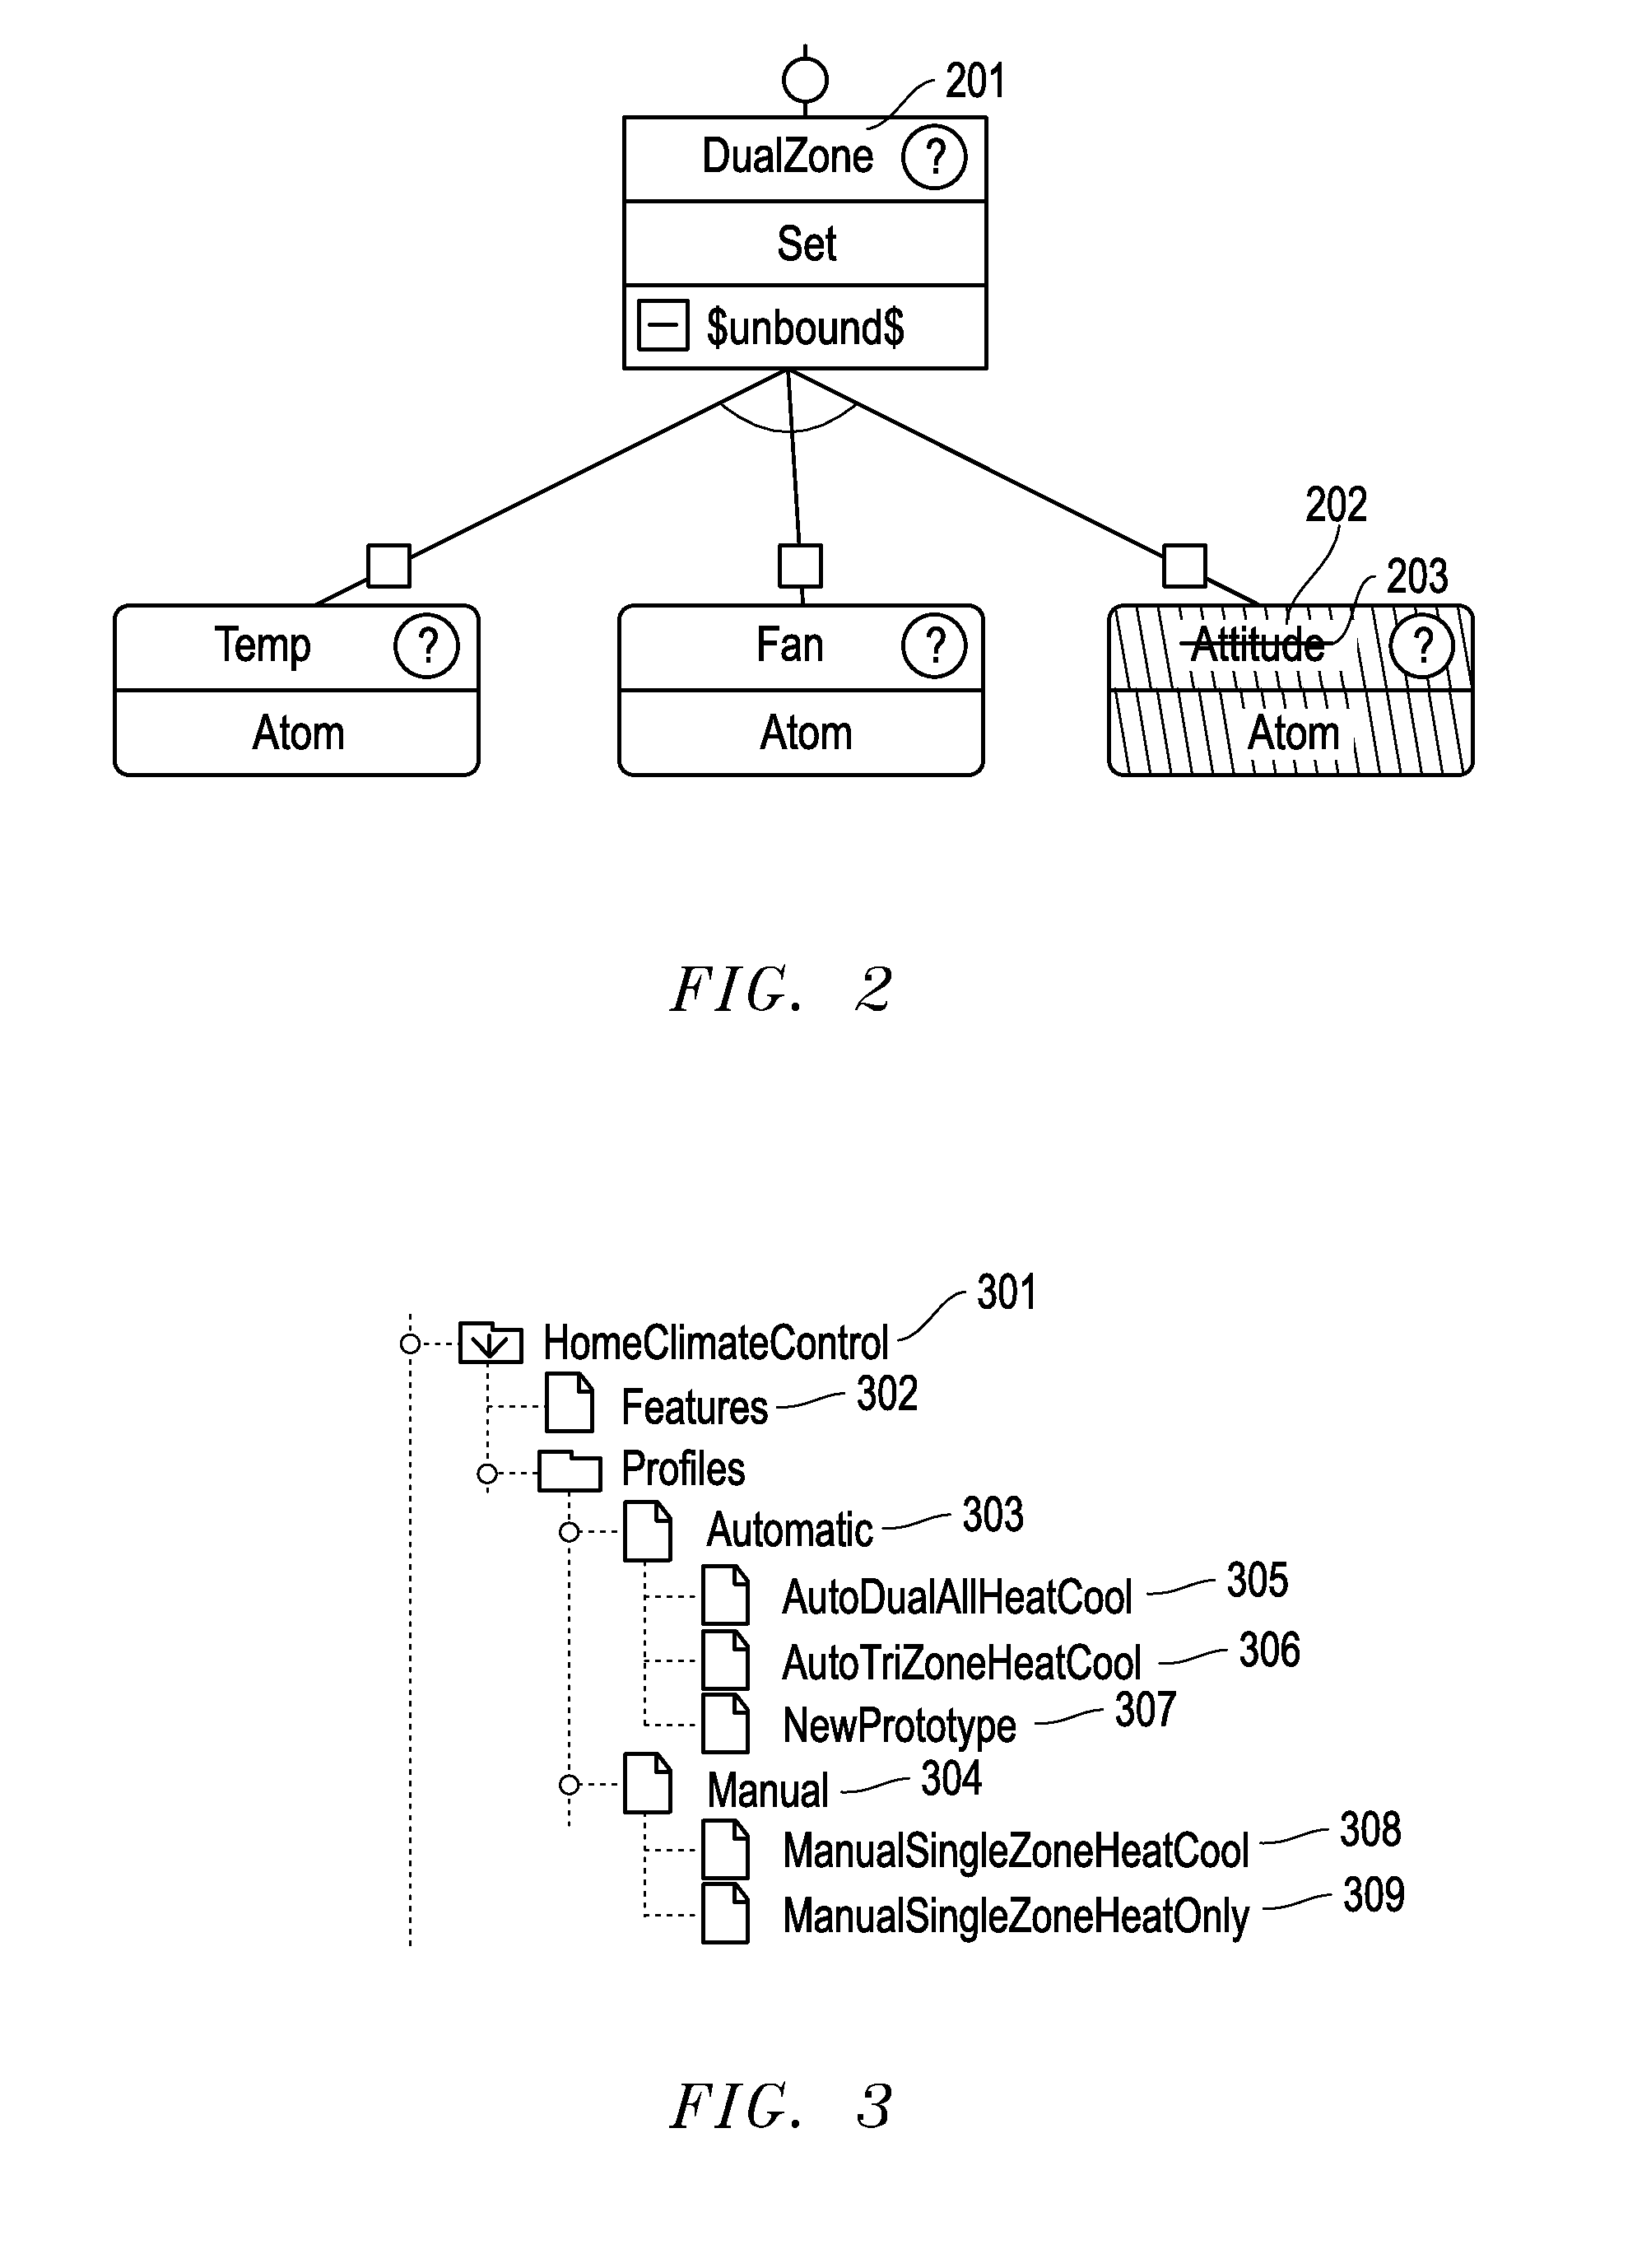 Multistage Configuration Trees for Managing Product Family Trees